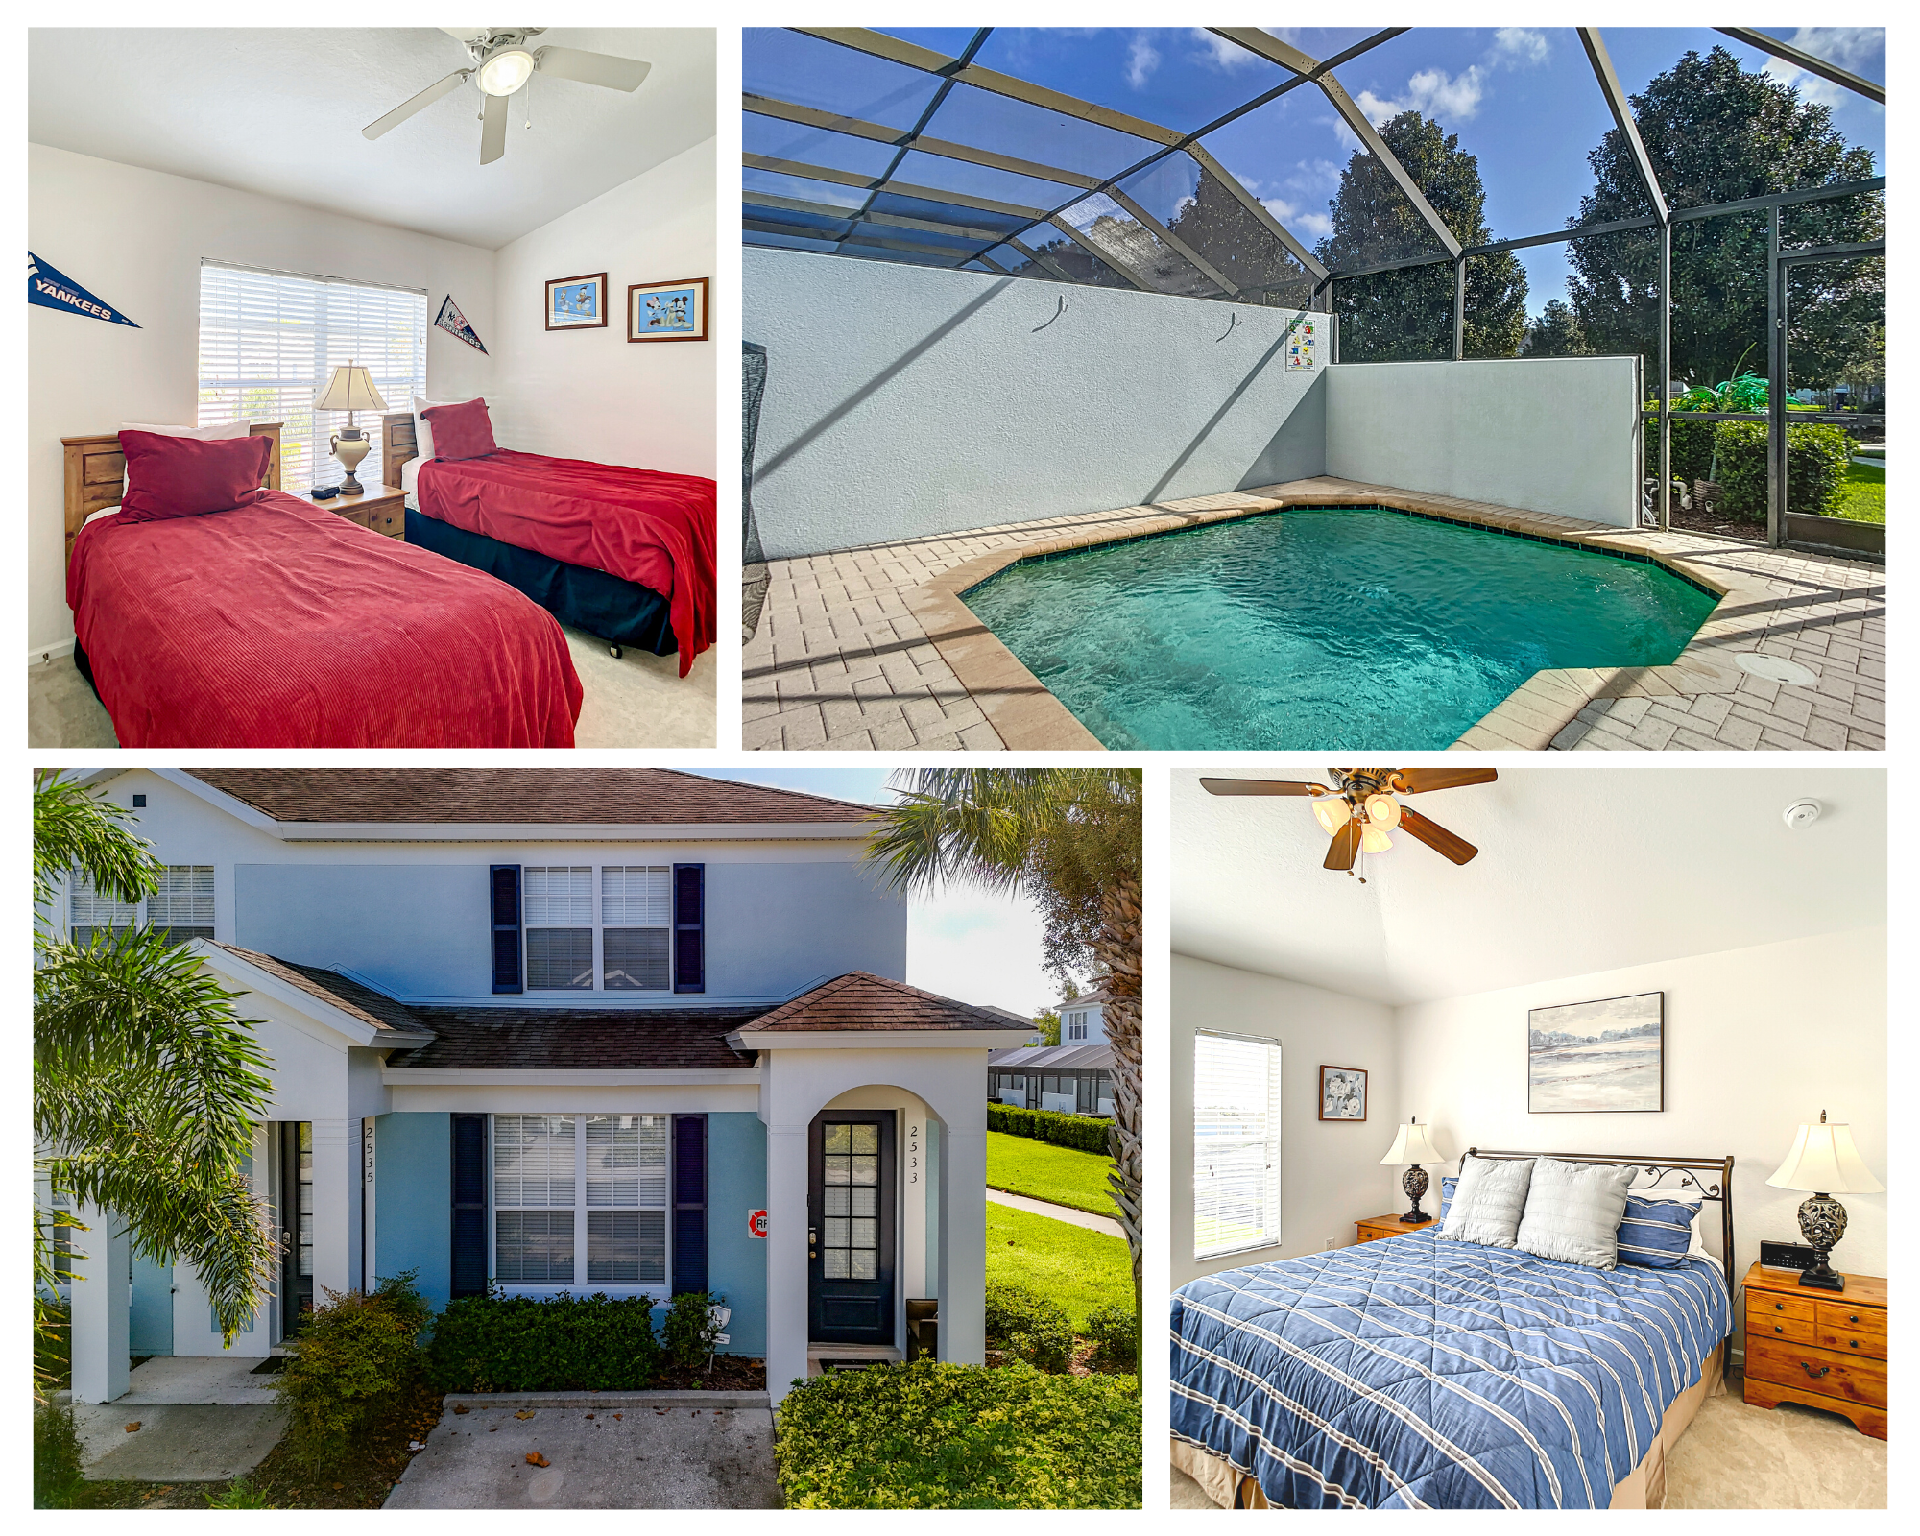 3 Bed Windsor Hills Townhome By Clubhouse & Pool - Celebration, FL